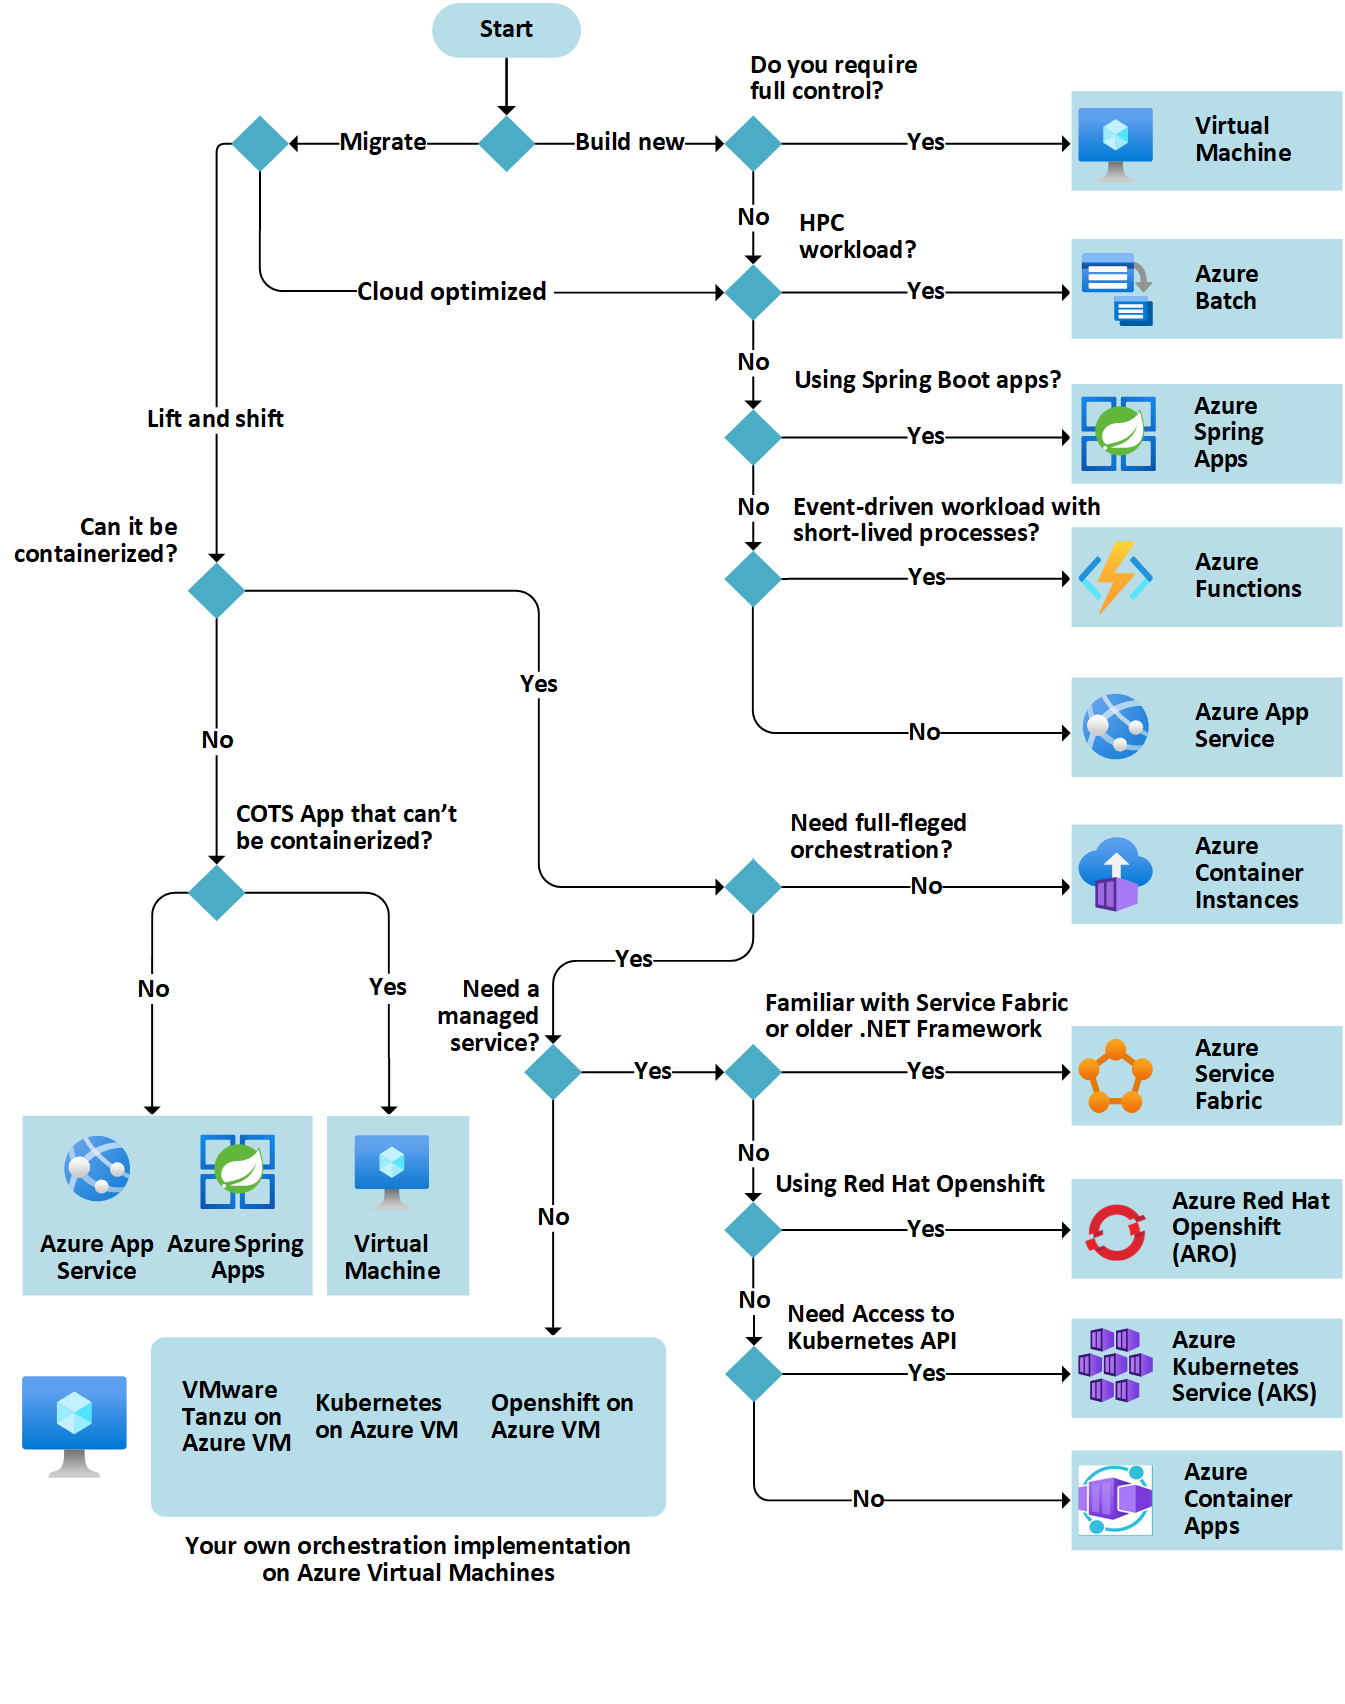 Decision tree for Azure compute services.